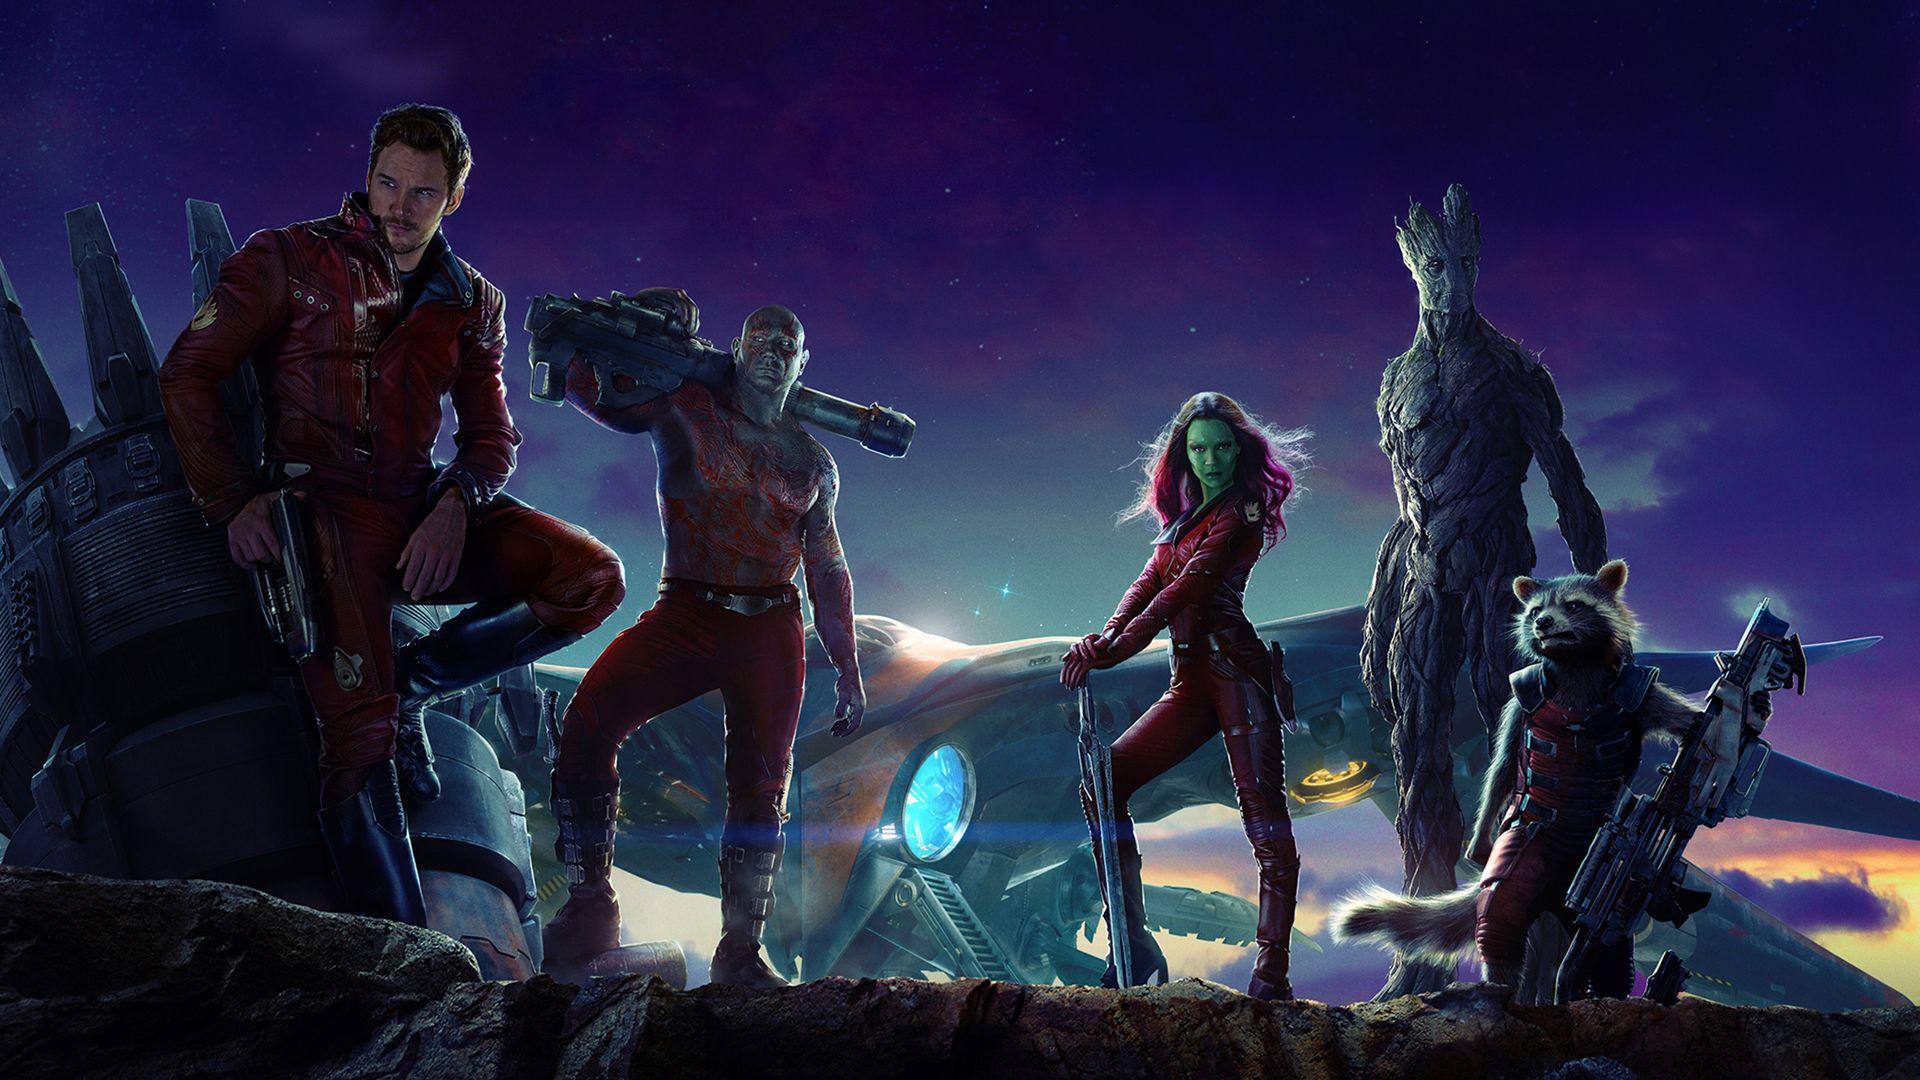 4k Guardians Of The Galaxy Wallpapers Top Free 4k Guardians Of The Galaxy Backgrounds Wallpaperaccess